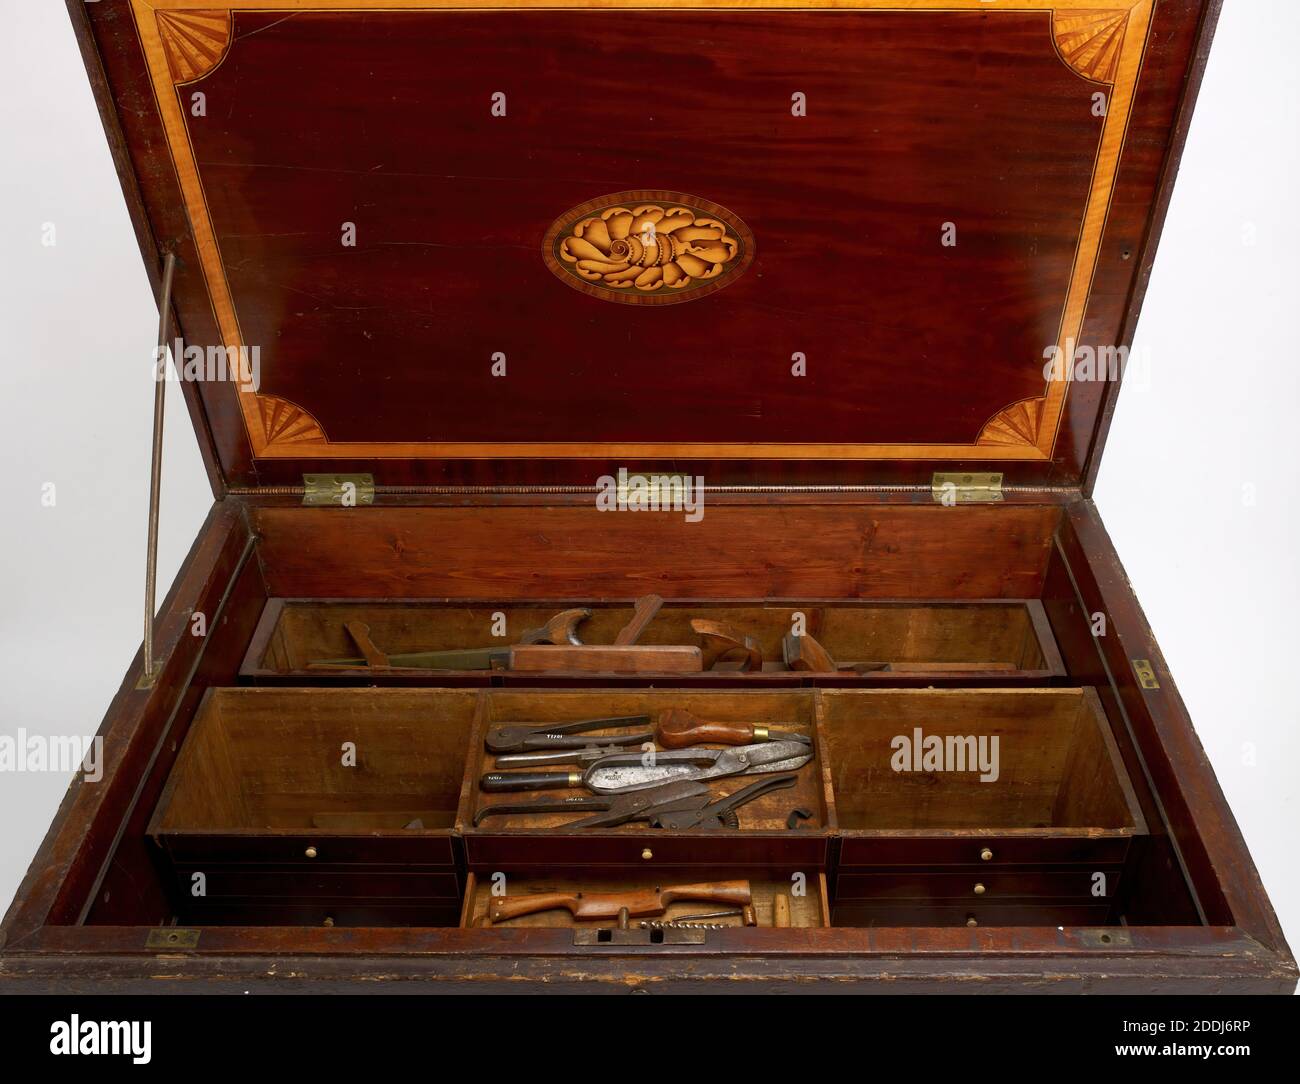 The 'Dolling' Tool Chest, 1780-1790, Large tool chest with hinged lid to top. pine carcass, the interior fitments of oak & pine, veneered with Spanish mahogany, inlaid with various woods., Social history, Wooden, Box, Work, Carpenter Stock Photo